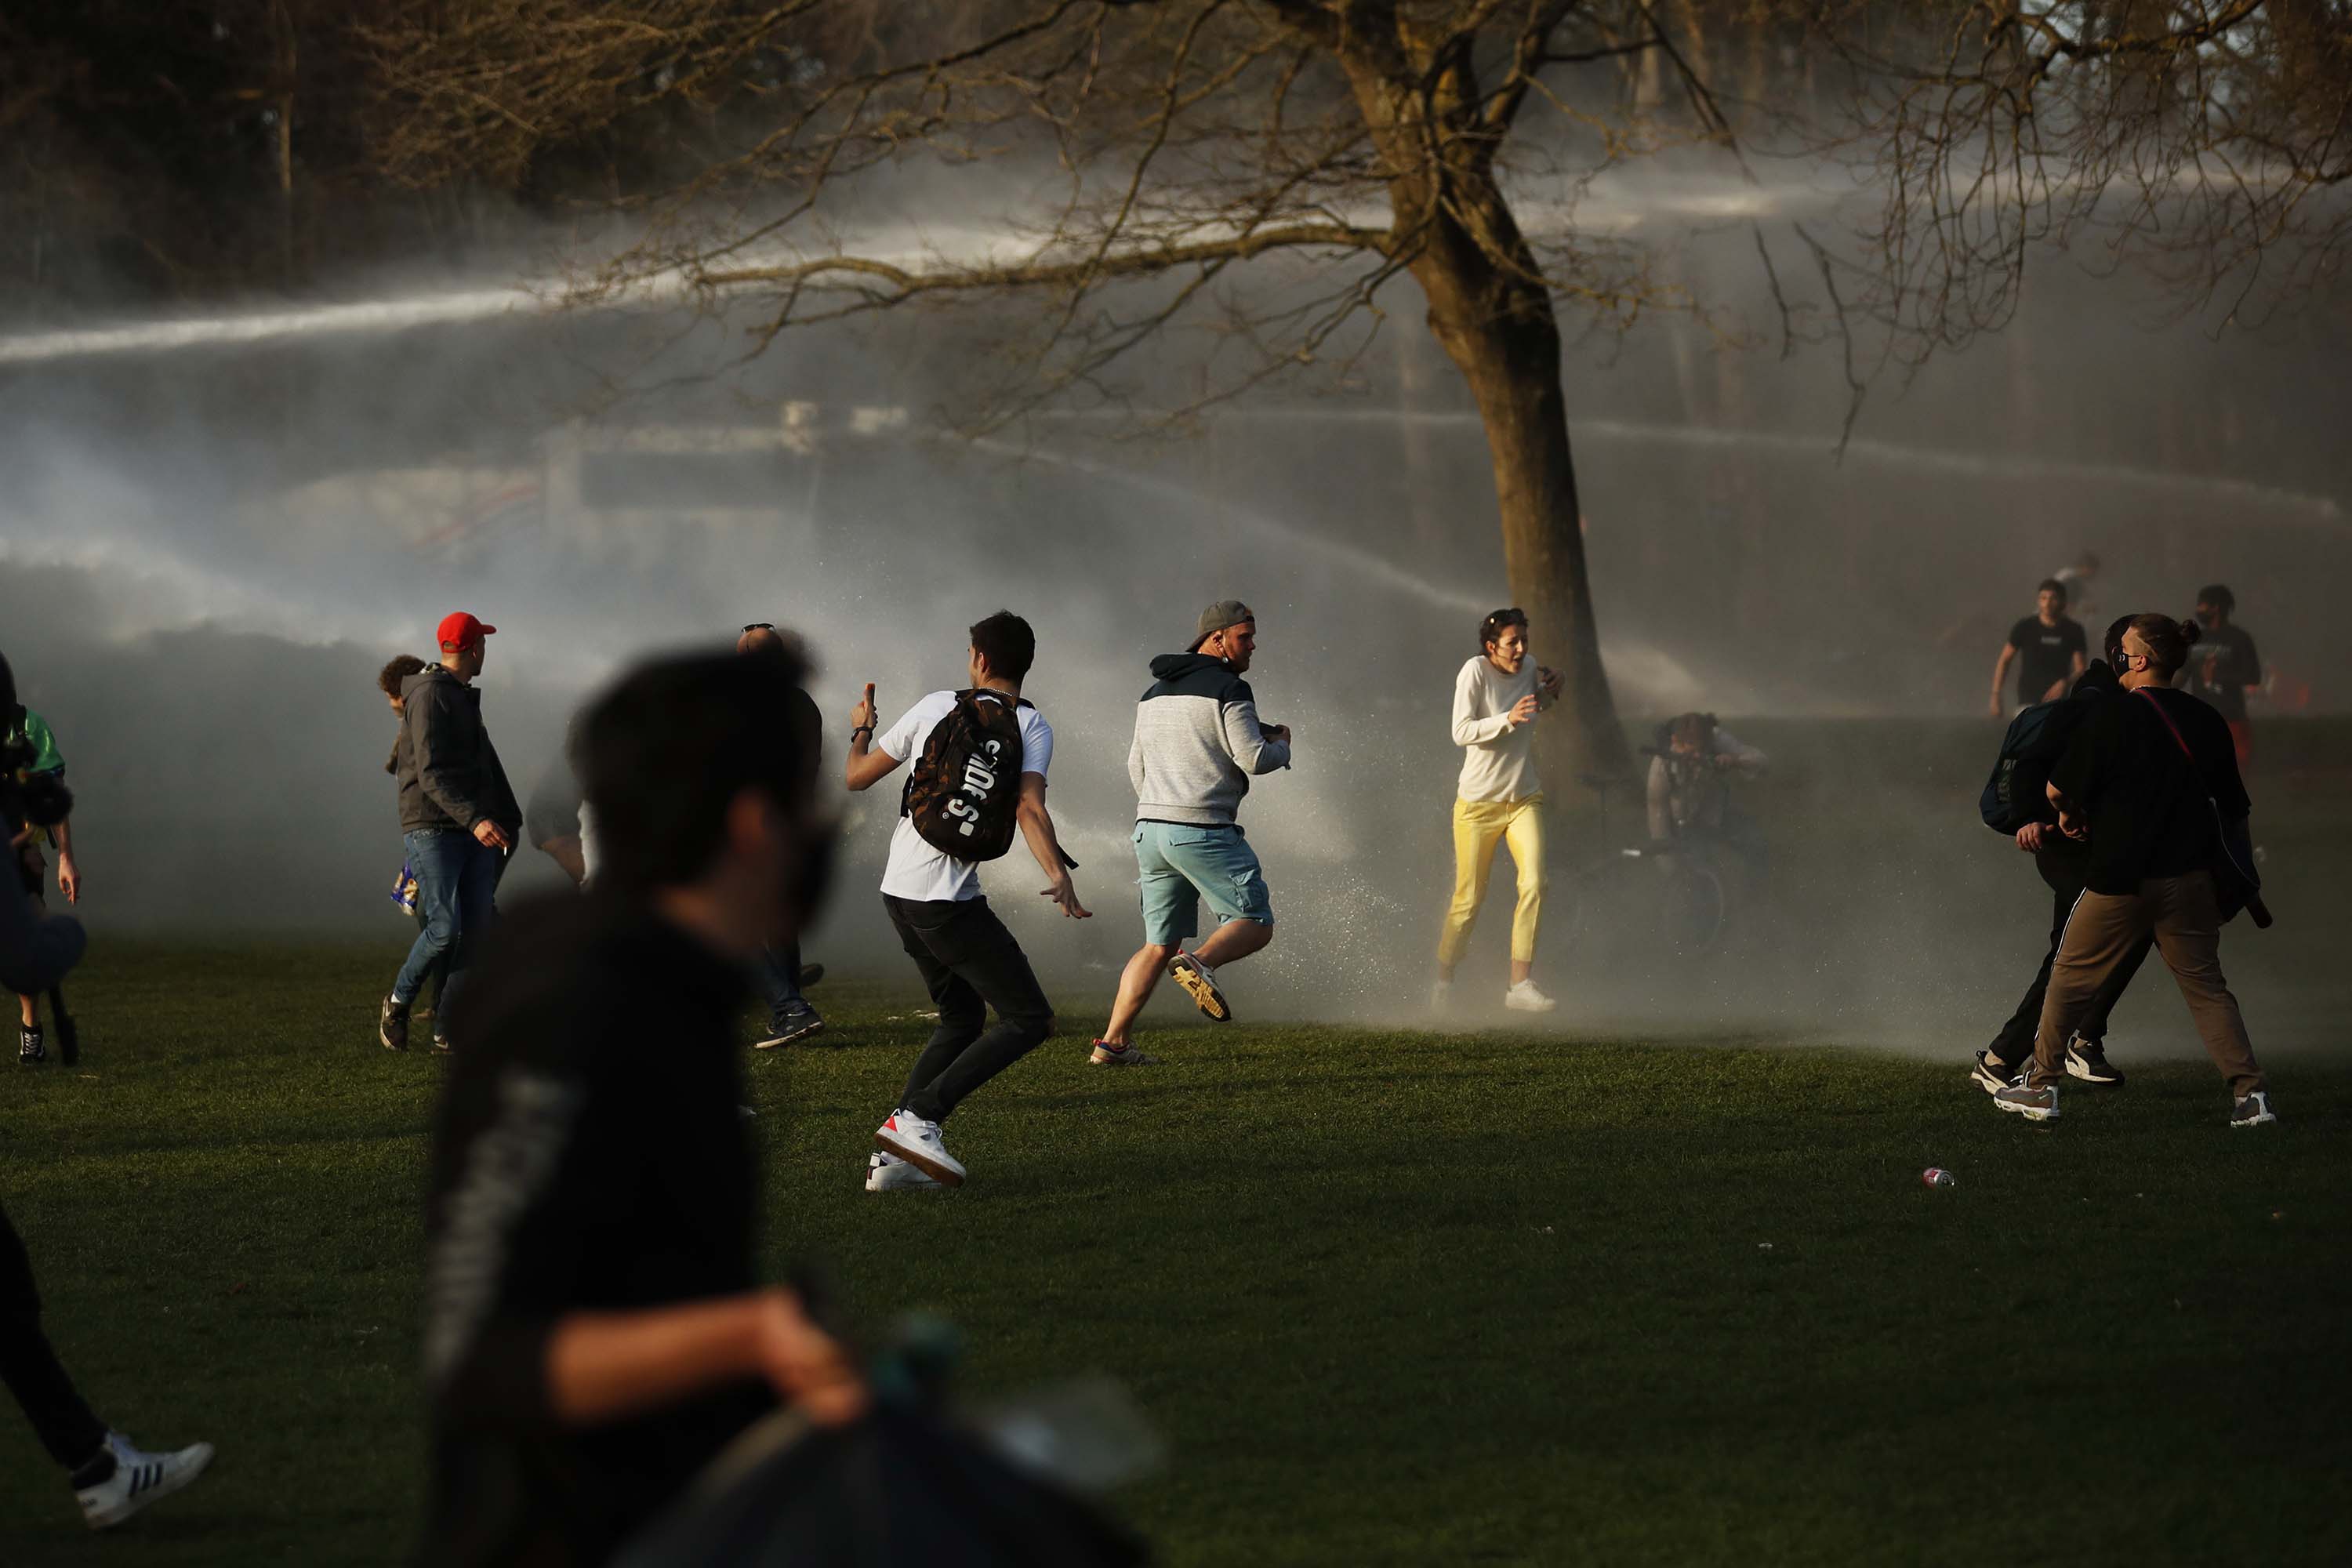 People scatter as police use a water cannon to disperse the crowd in Bois de la Cambre park.